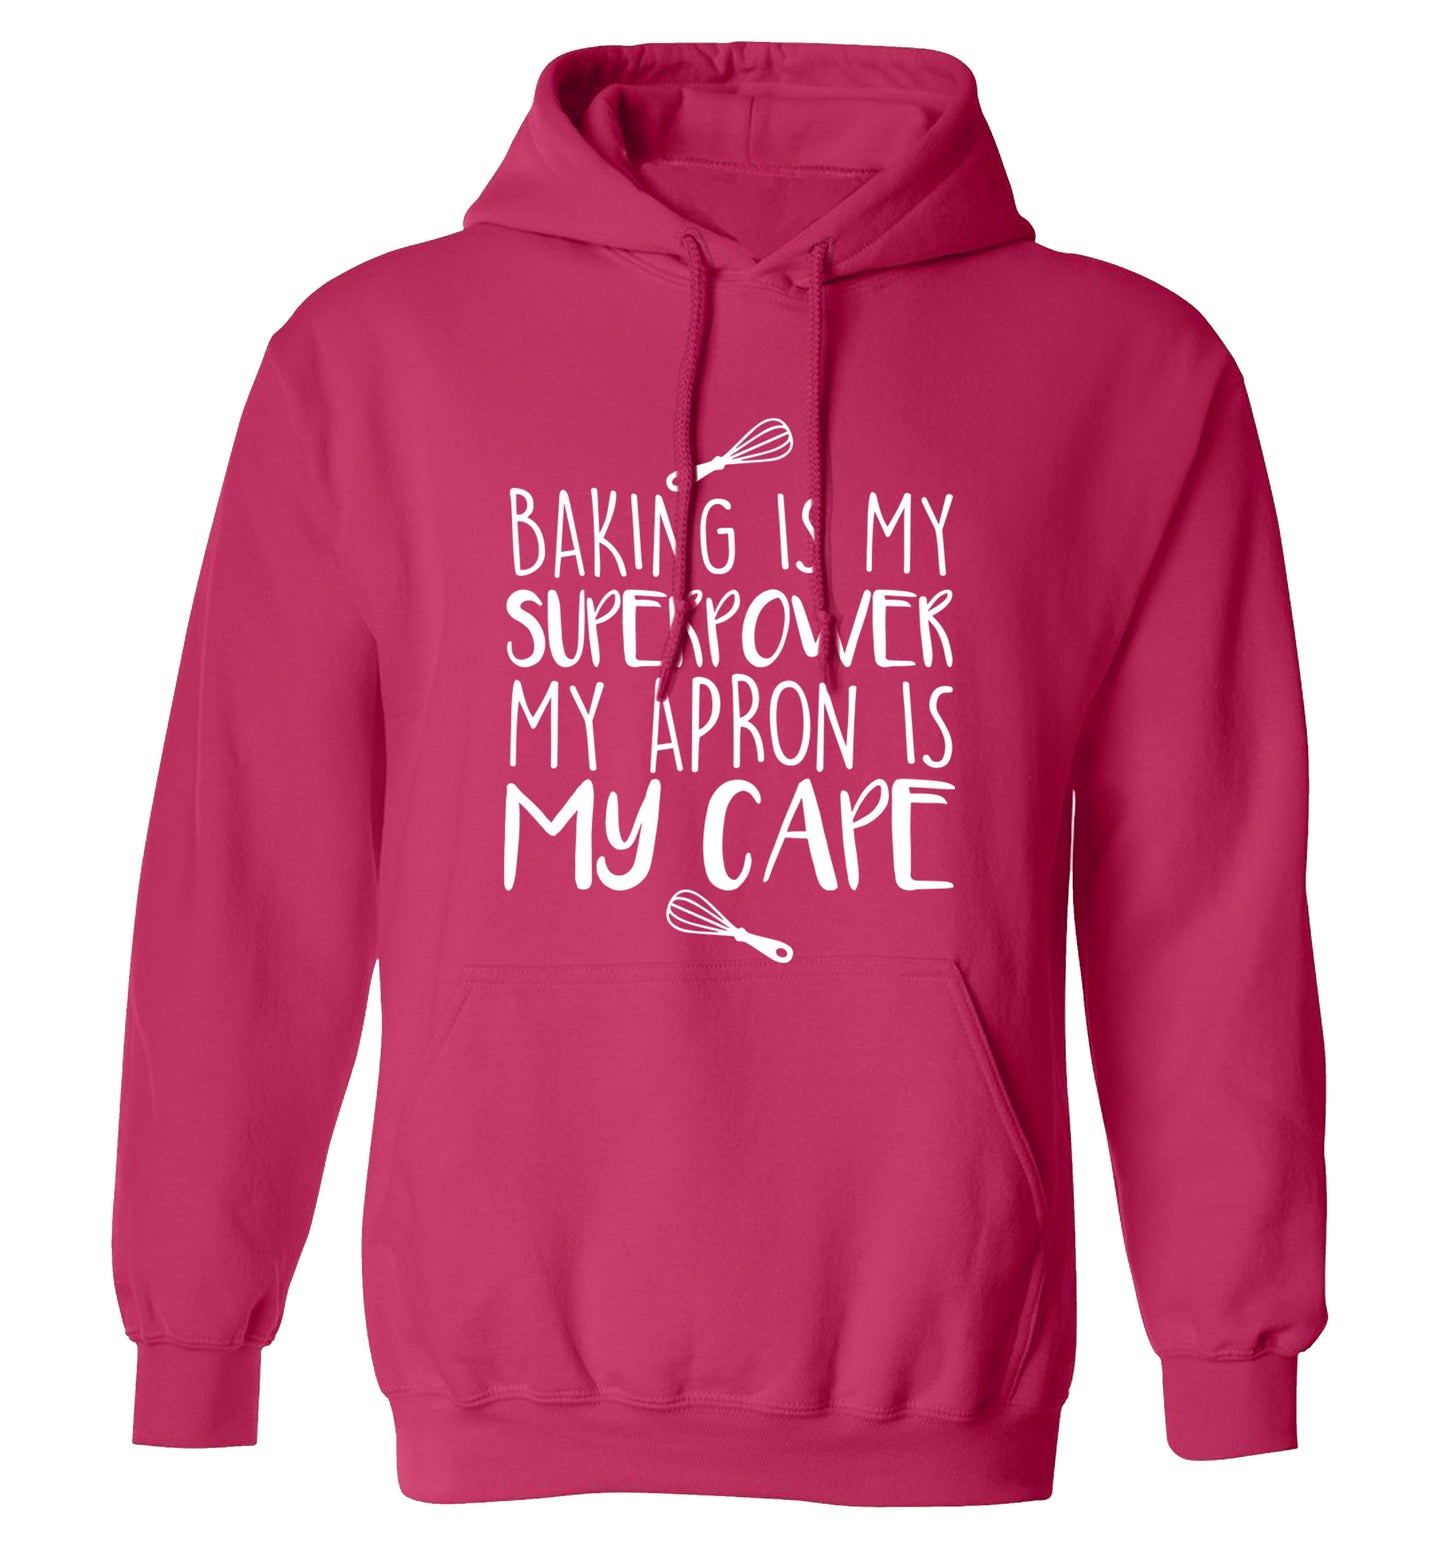 Baking is my superpower my apron is my cape adults unisex pink hoodie 2XL